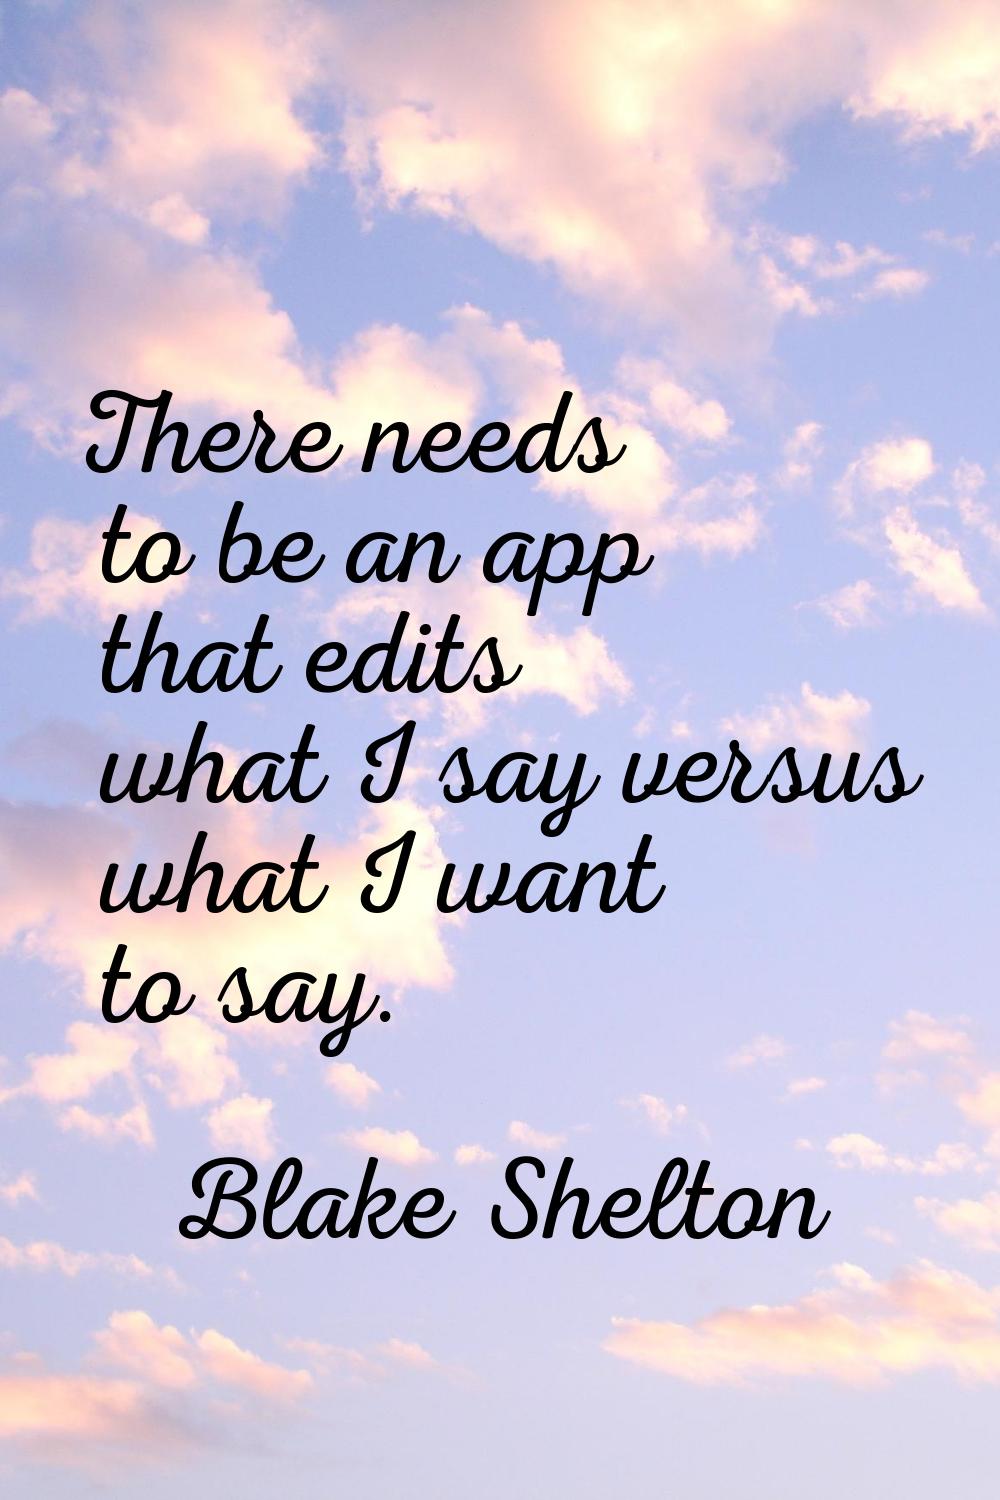 There needs to be an app that edits what I say versus what I want to say.